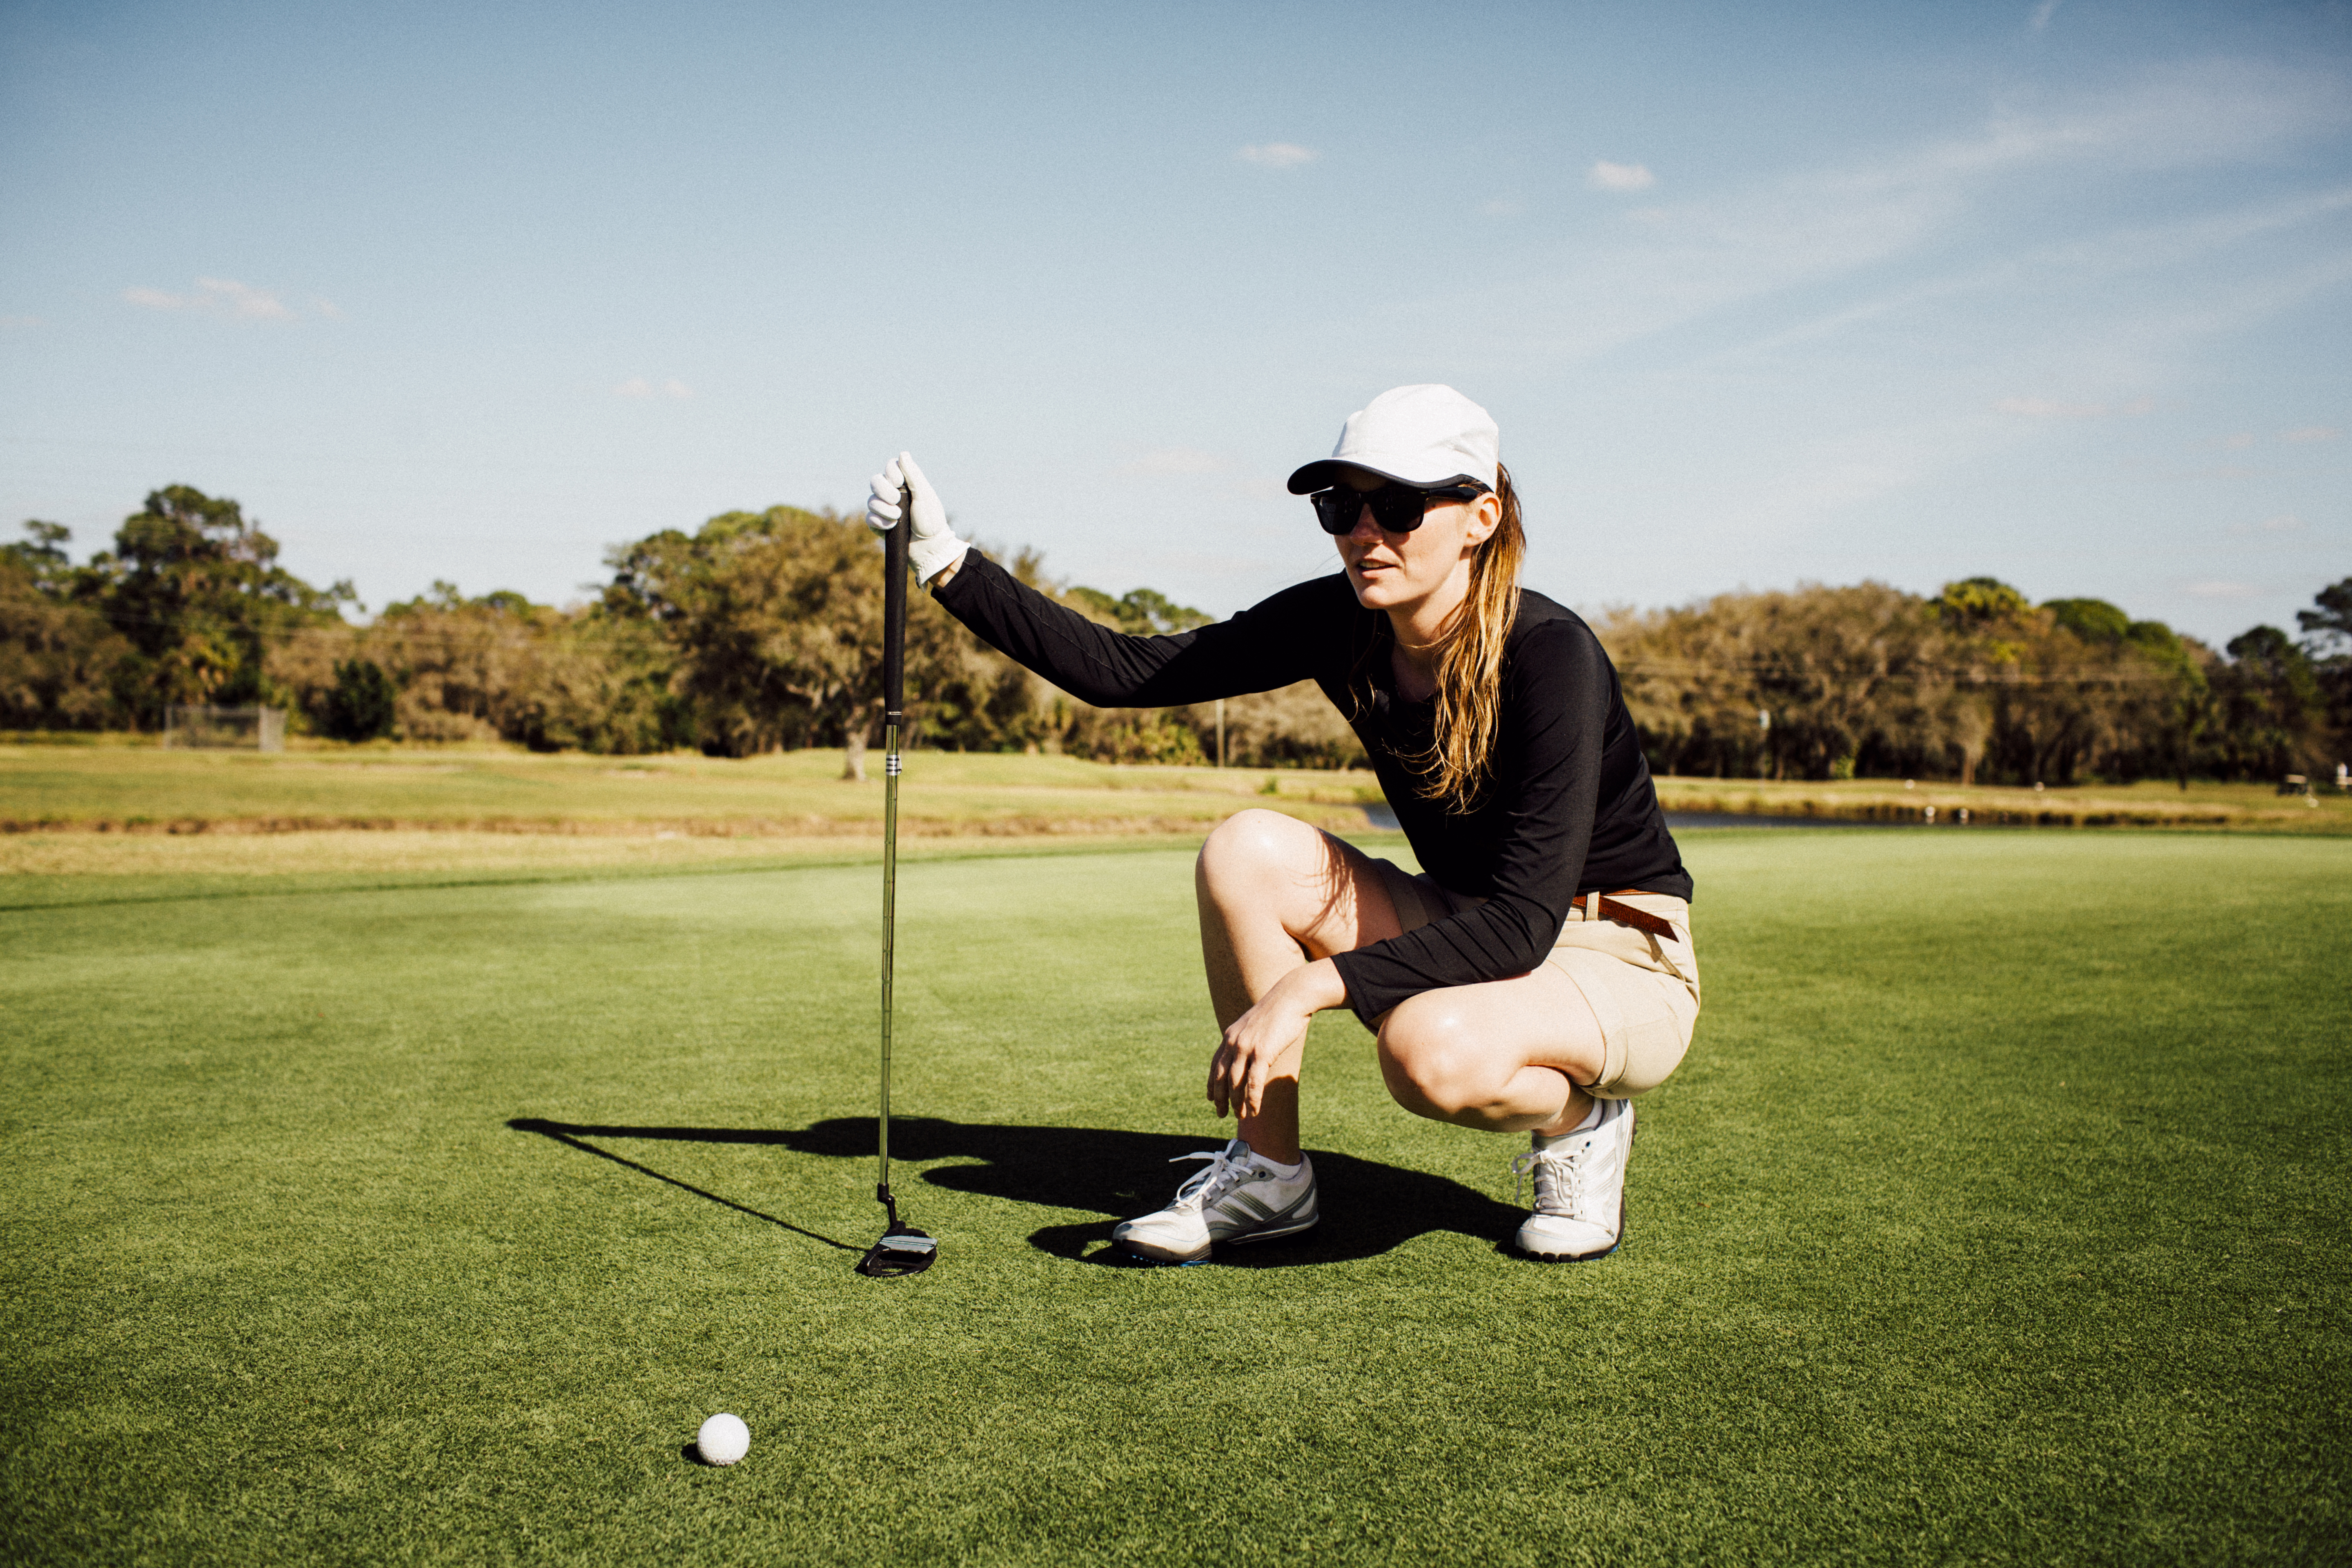 What can you wear to the Does golfer need a female instructor? Your questions answered | GolfDigest.com